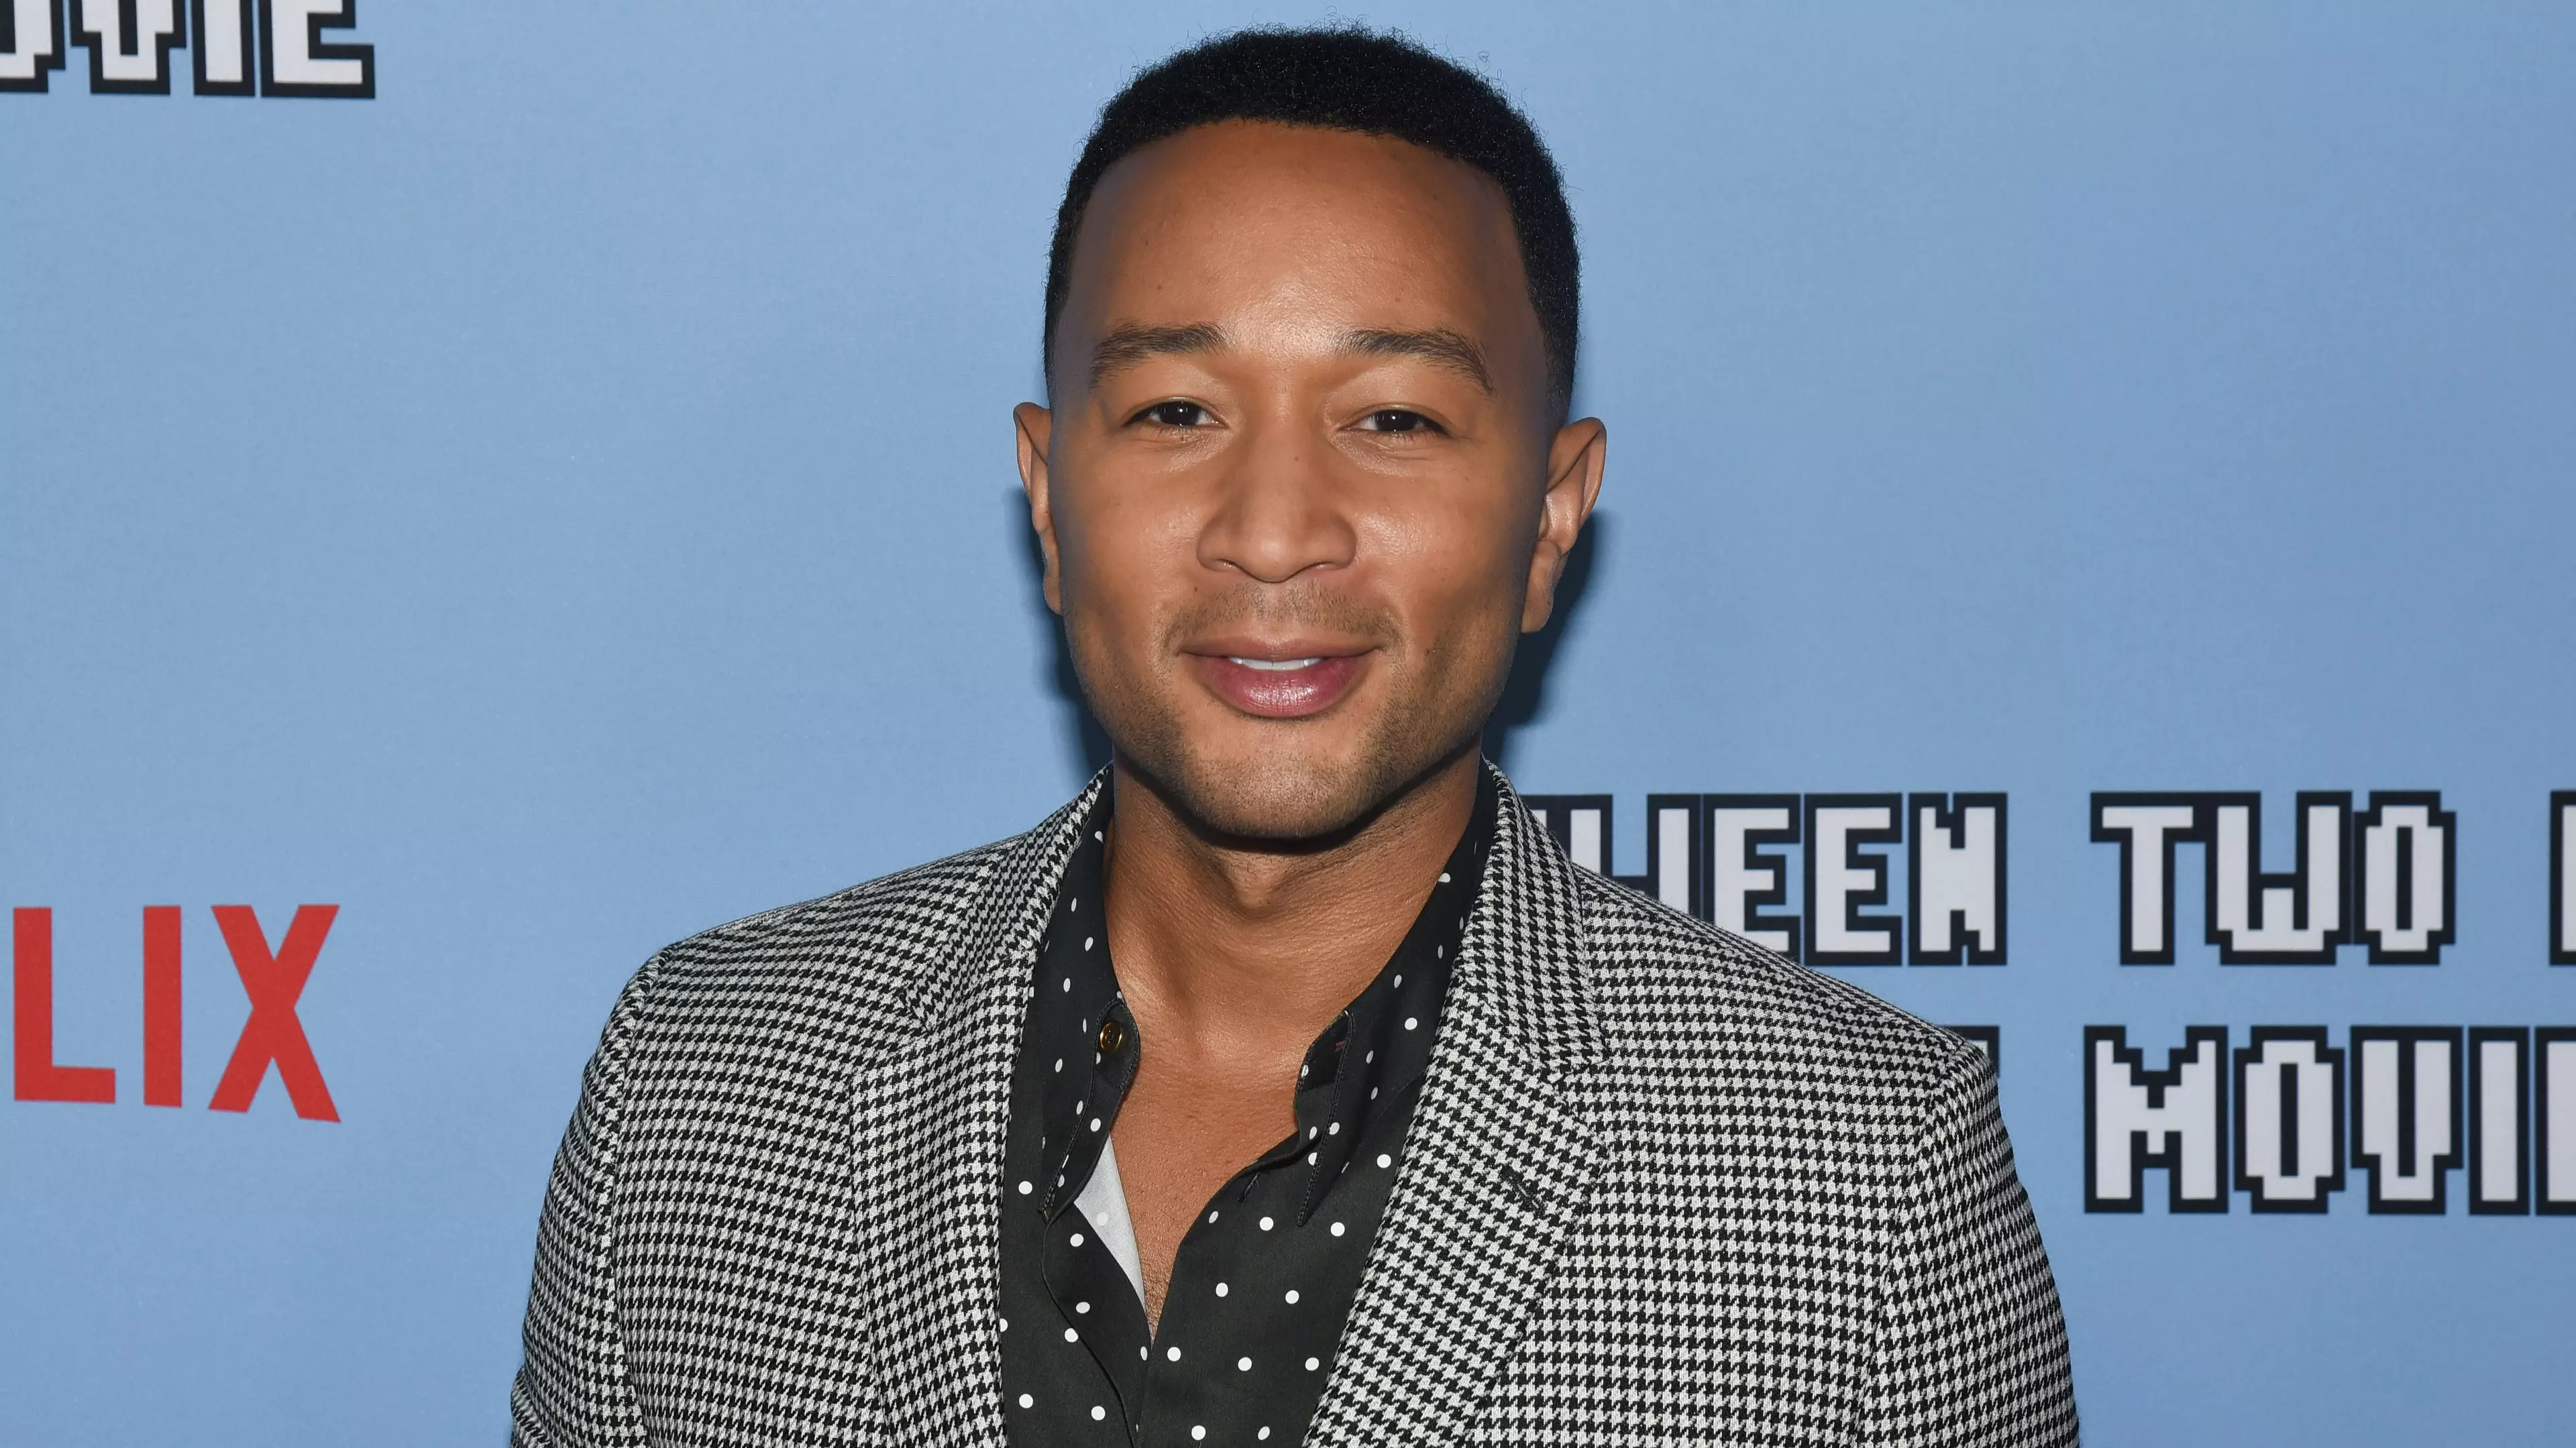 John Legend Confirms He And Kanye West 'Drifted Apart'